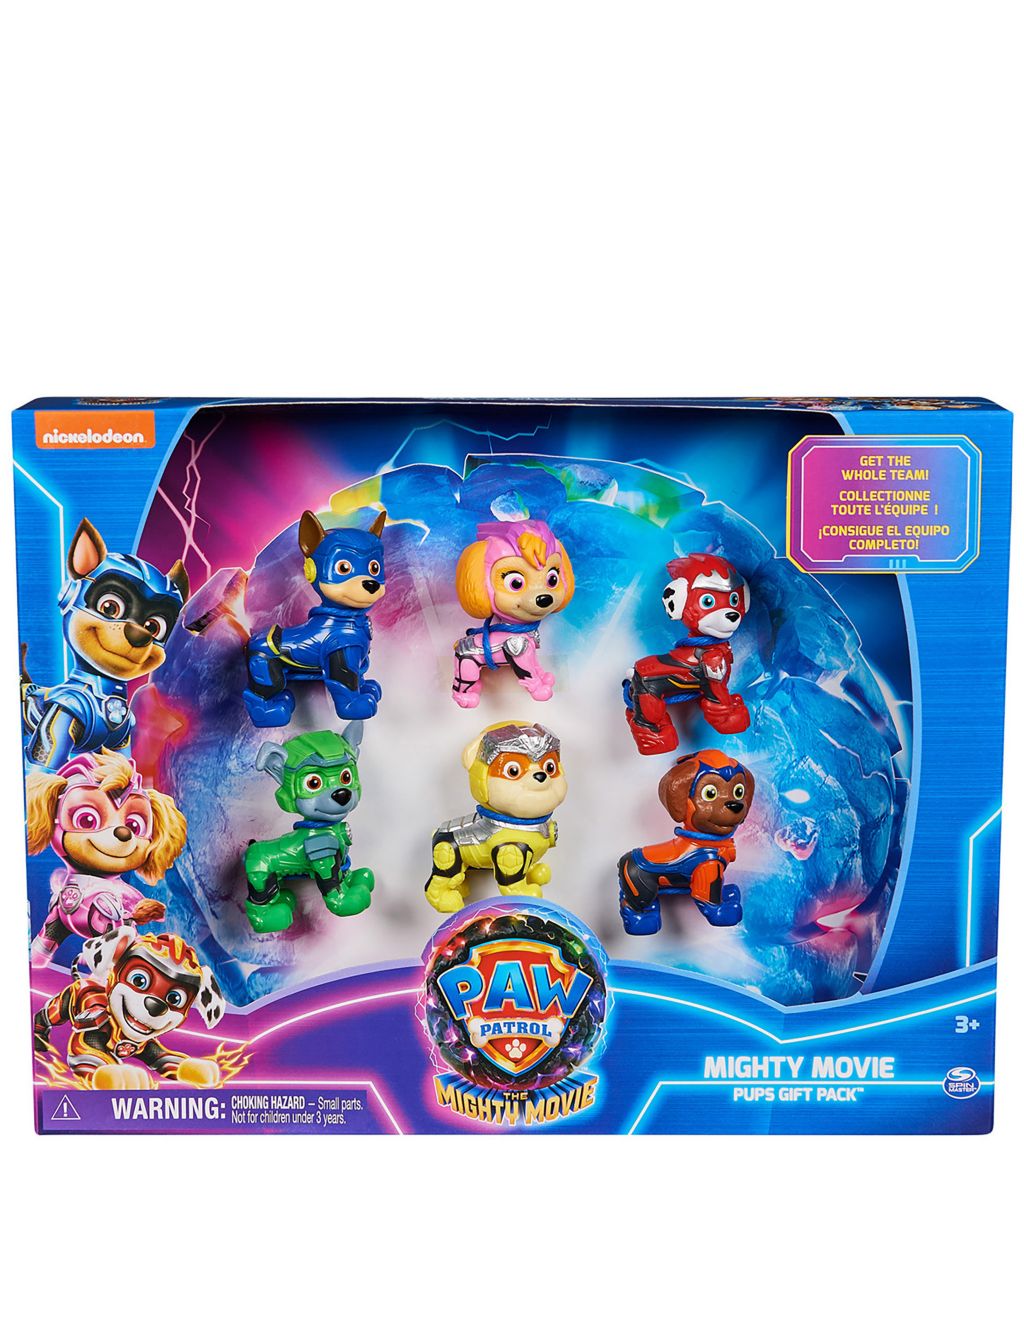 The Mighty Movie Pups Gift Pack (3+ Yrs)